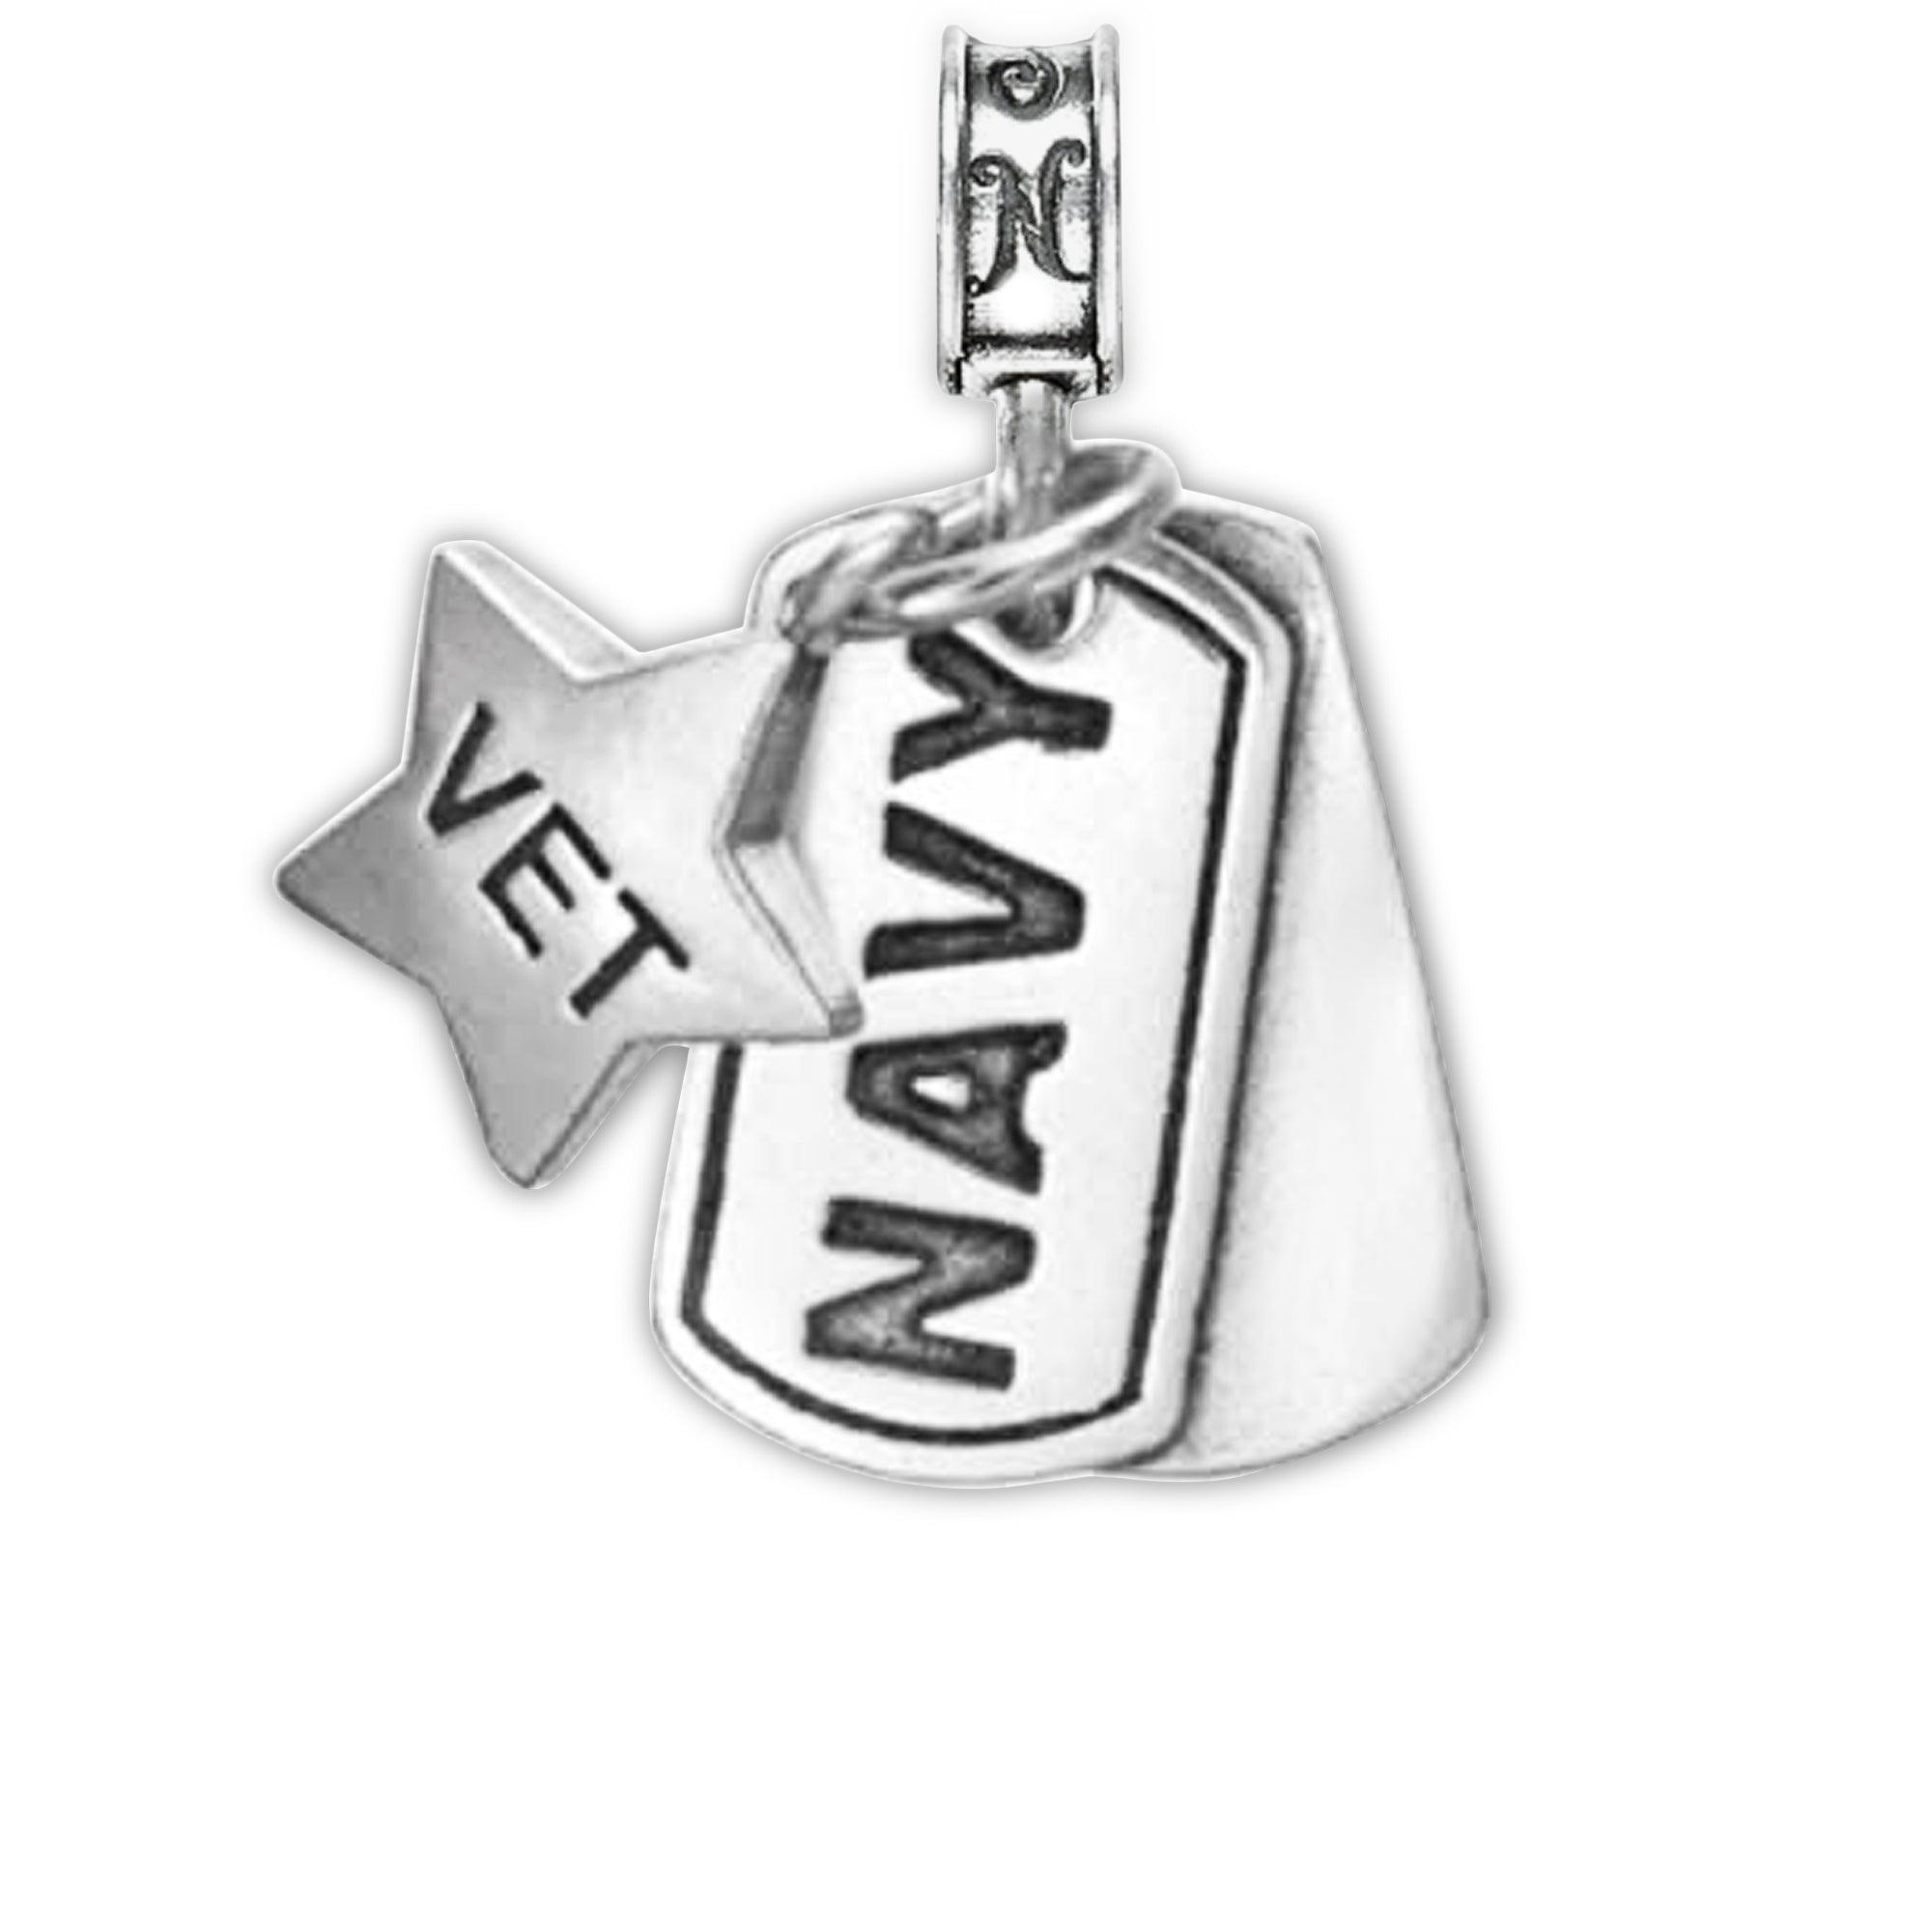 Military Jewelry, Military Charms, Navy, USN, Military Gifts, Navy Dog Tag, Navy Veteran